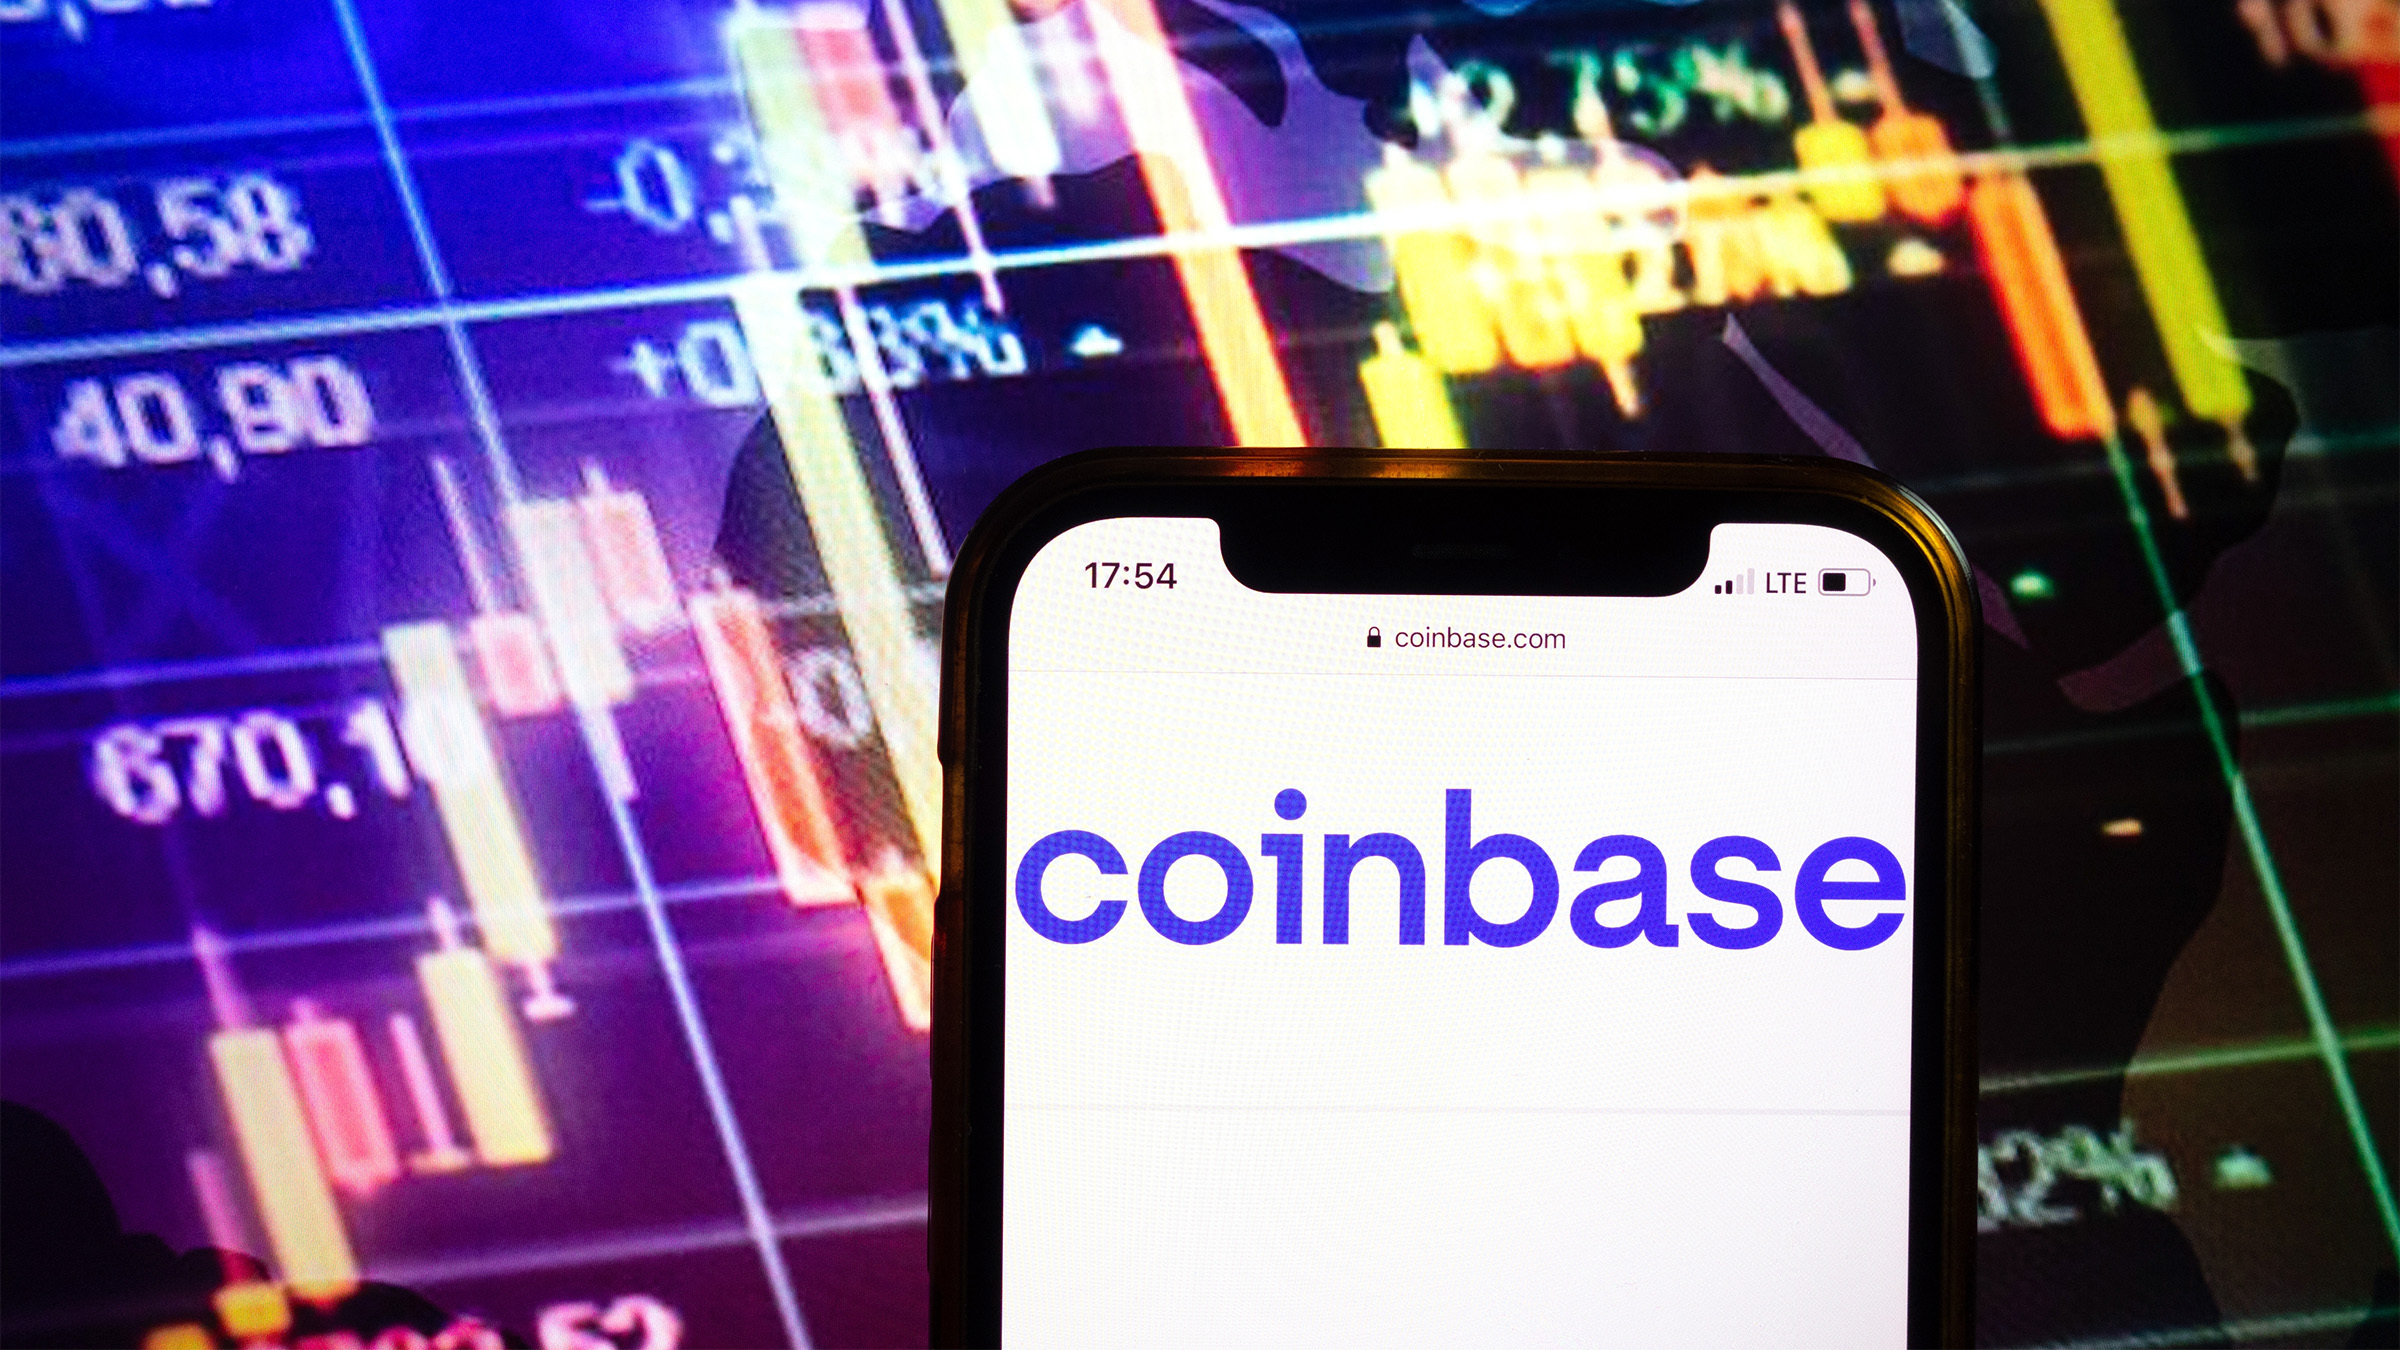 Coinbase to Add Dash, Ripple and Stratis?